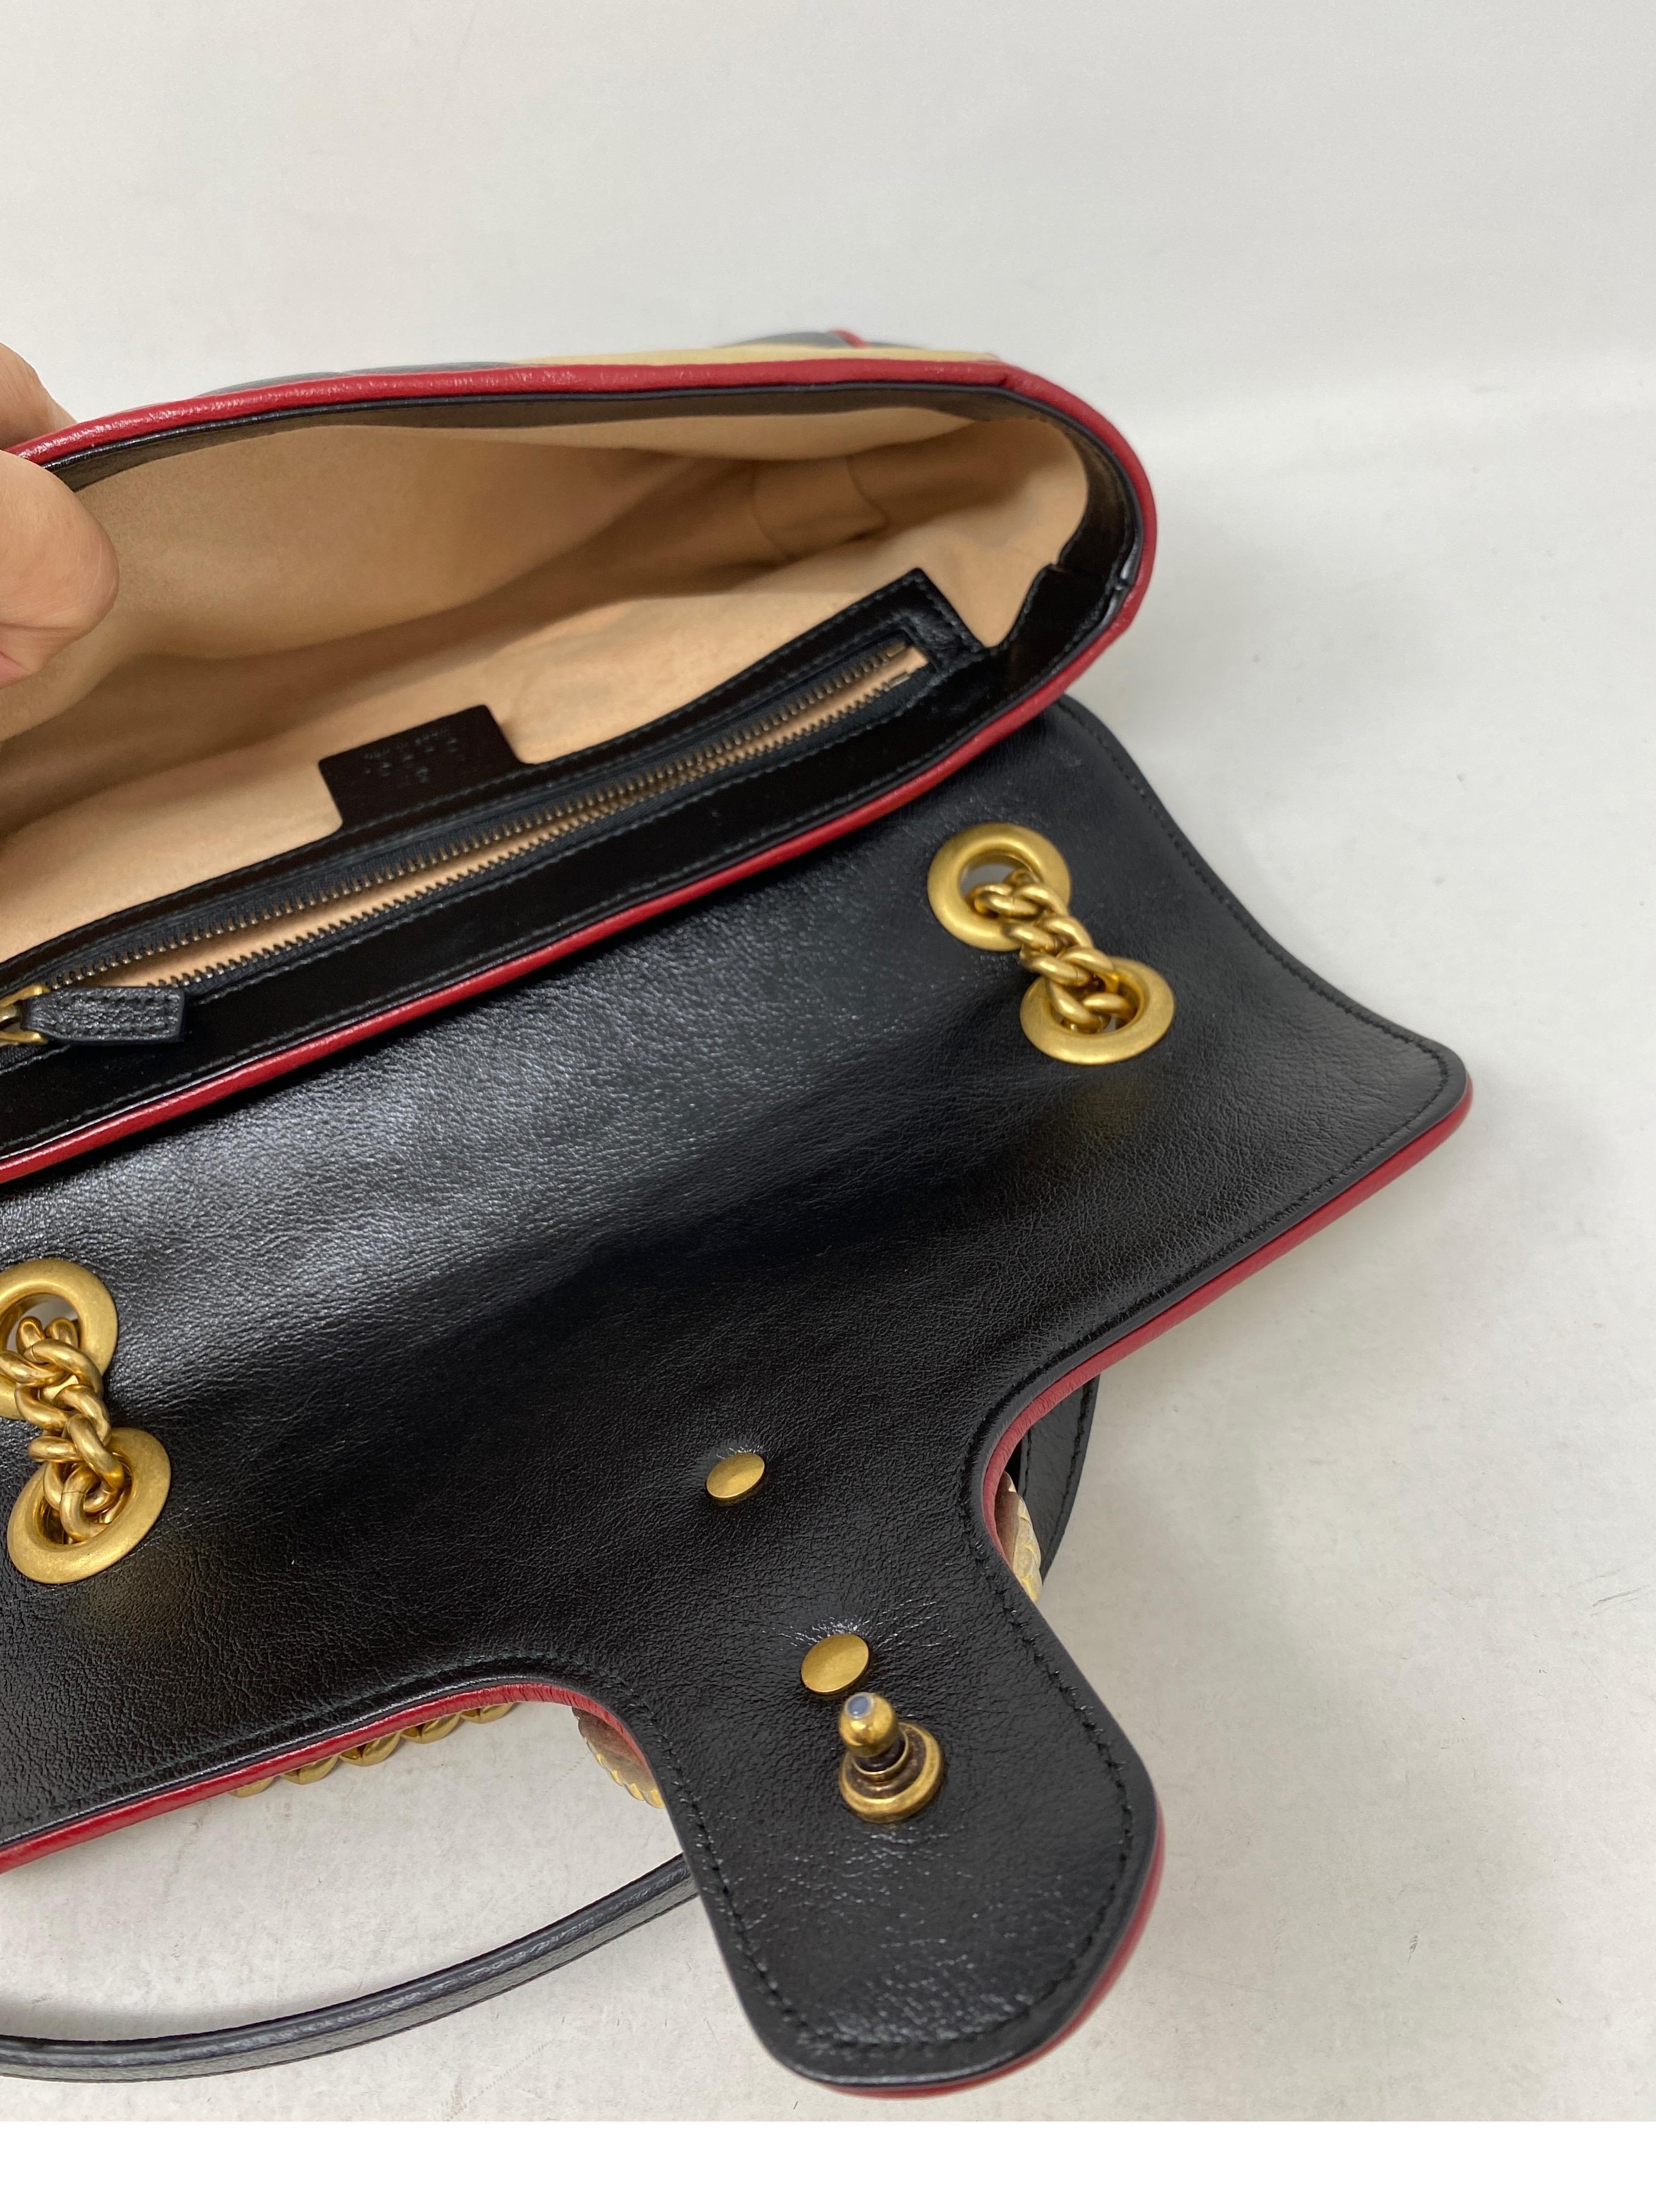 Gucci Red and Black Marmont Bag  8